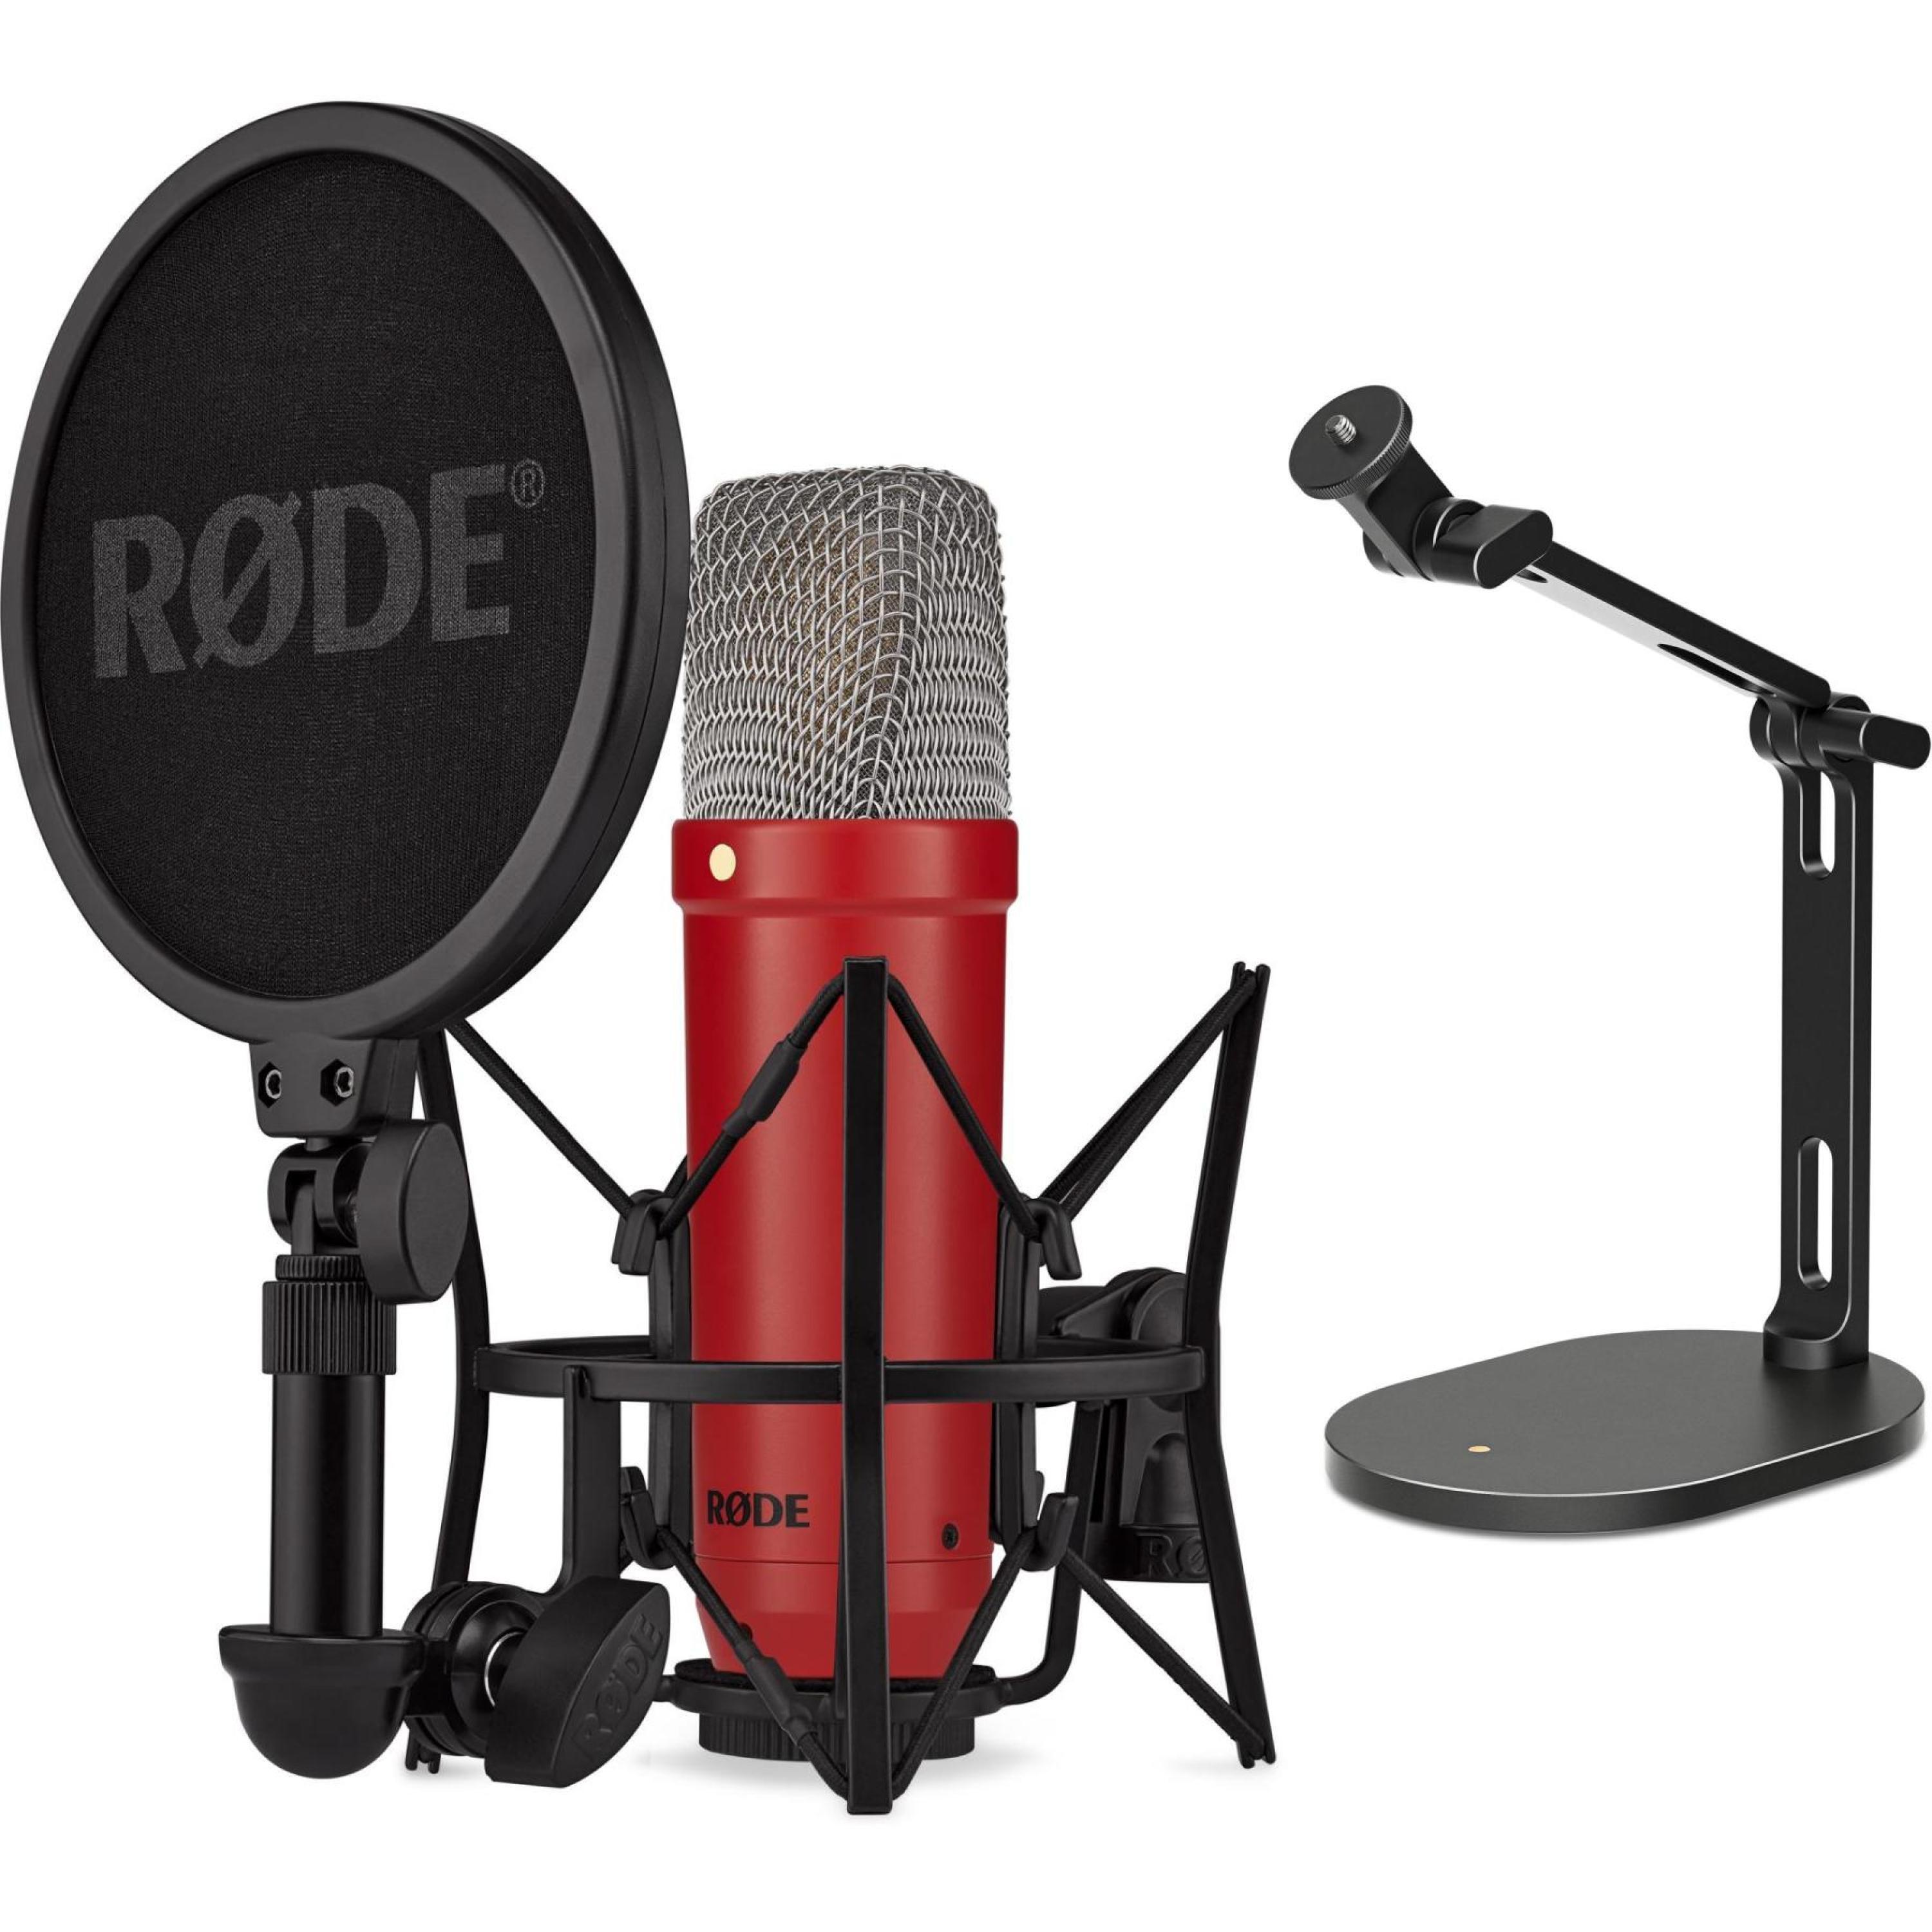 Rode NT1 Signature Series Condenser Microphone with Desk Stand - Red